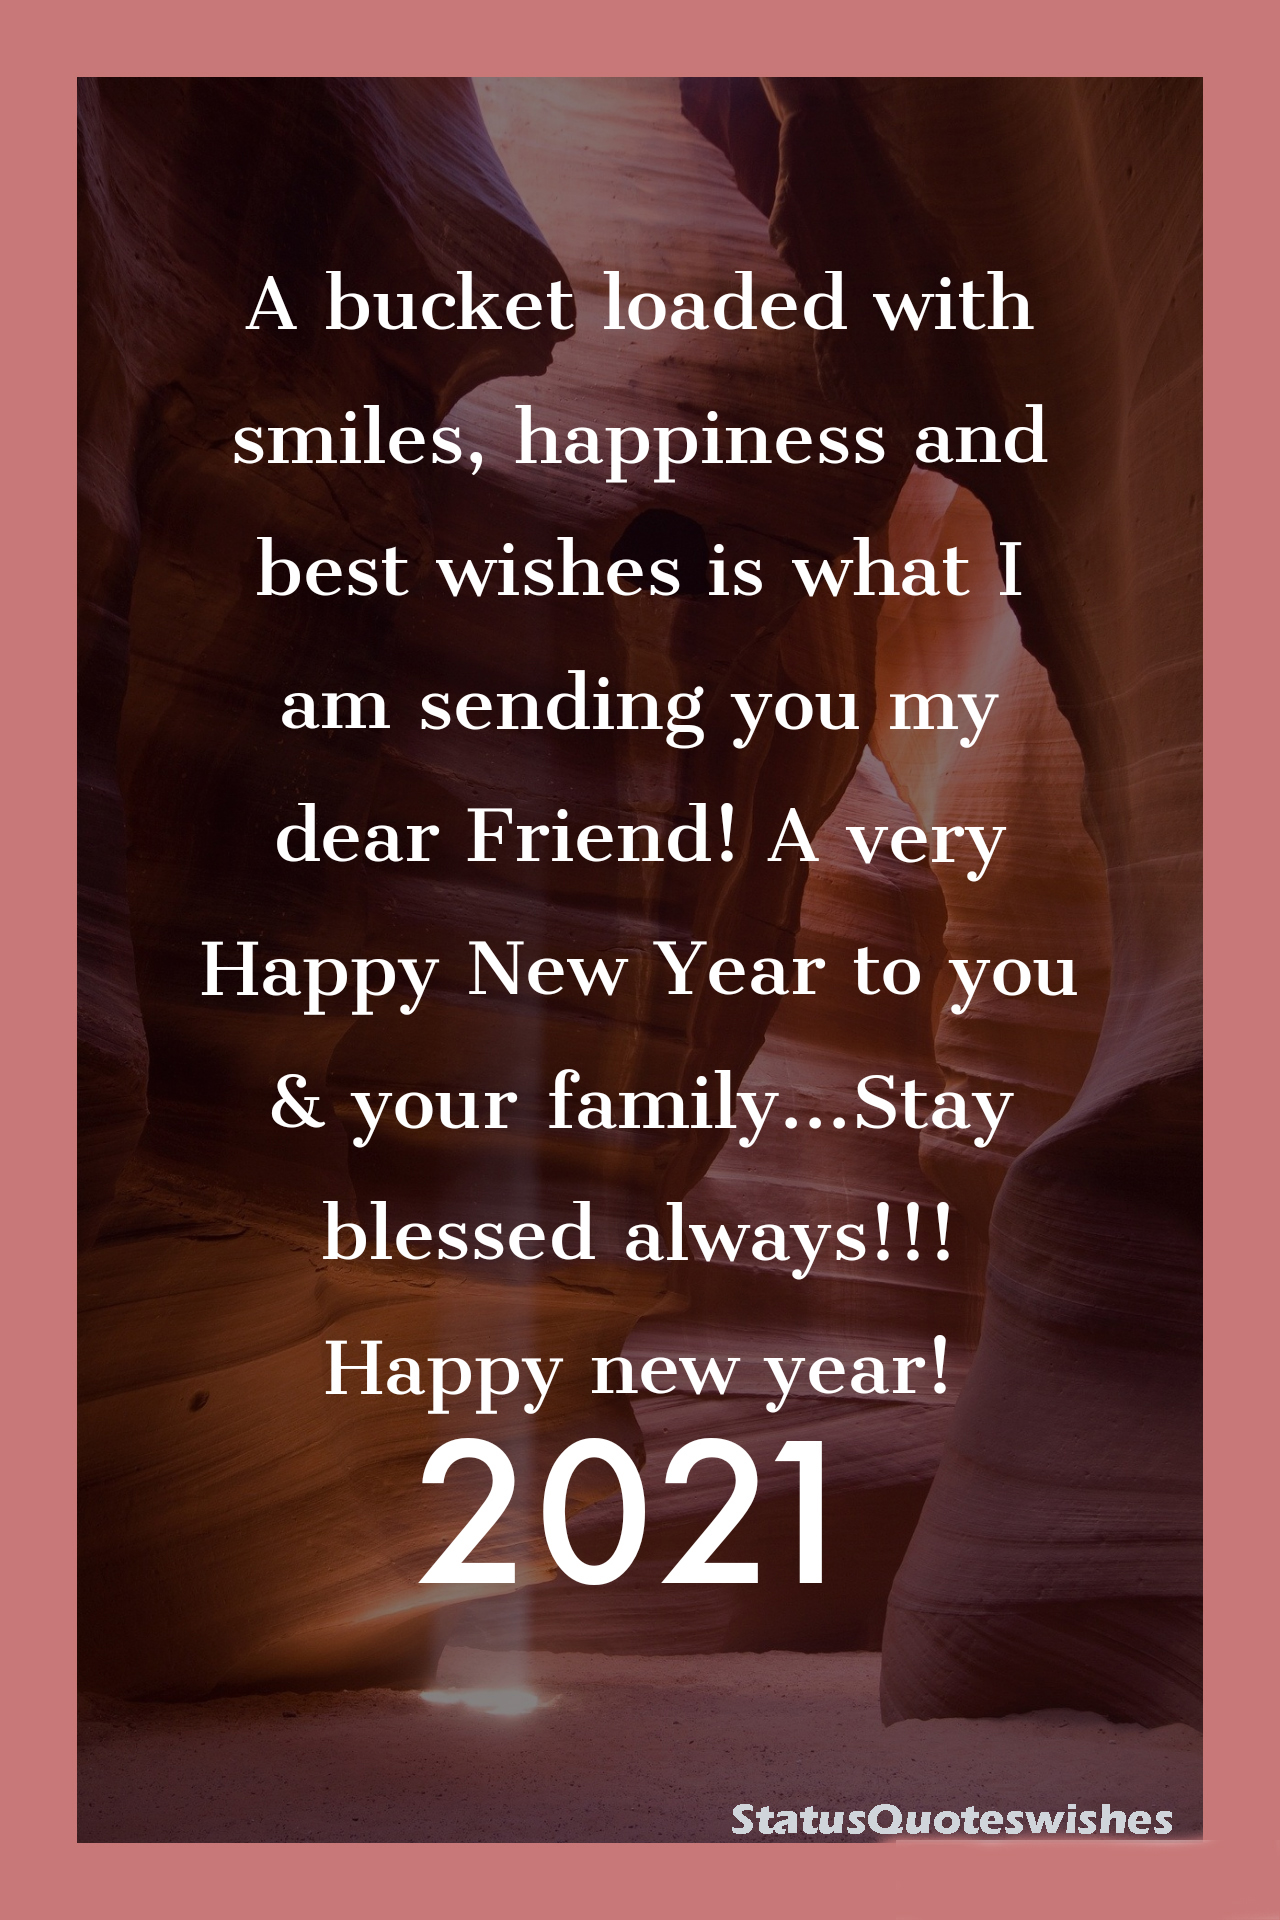 Happy New Year wishes for 2021 with Beautiful line Quotes are here. Share this wishes image with Friends, Family and your Lovable persons